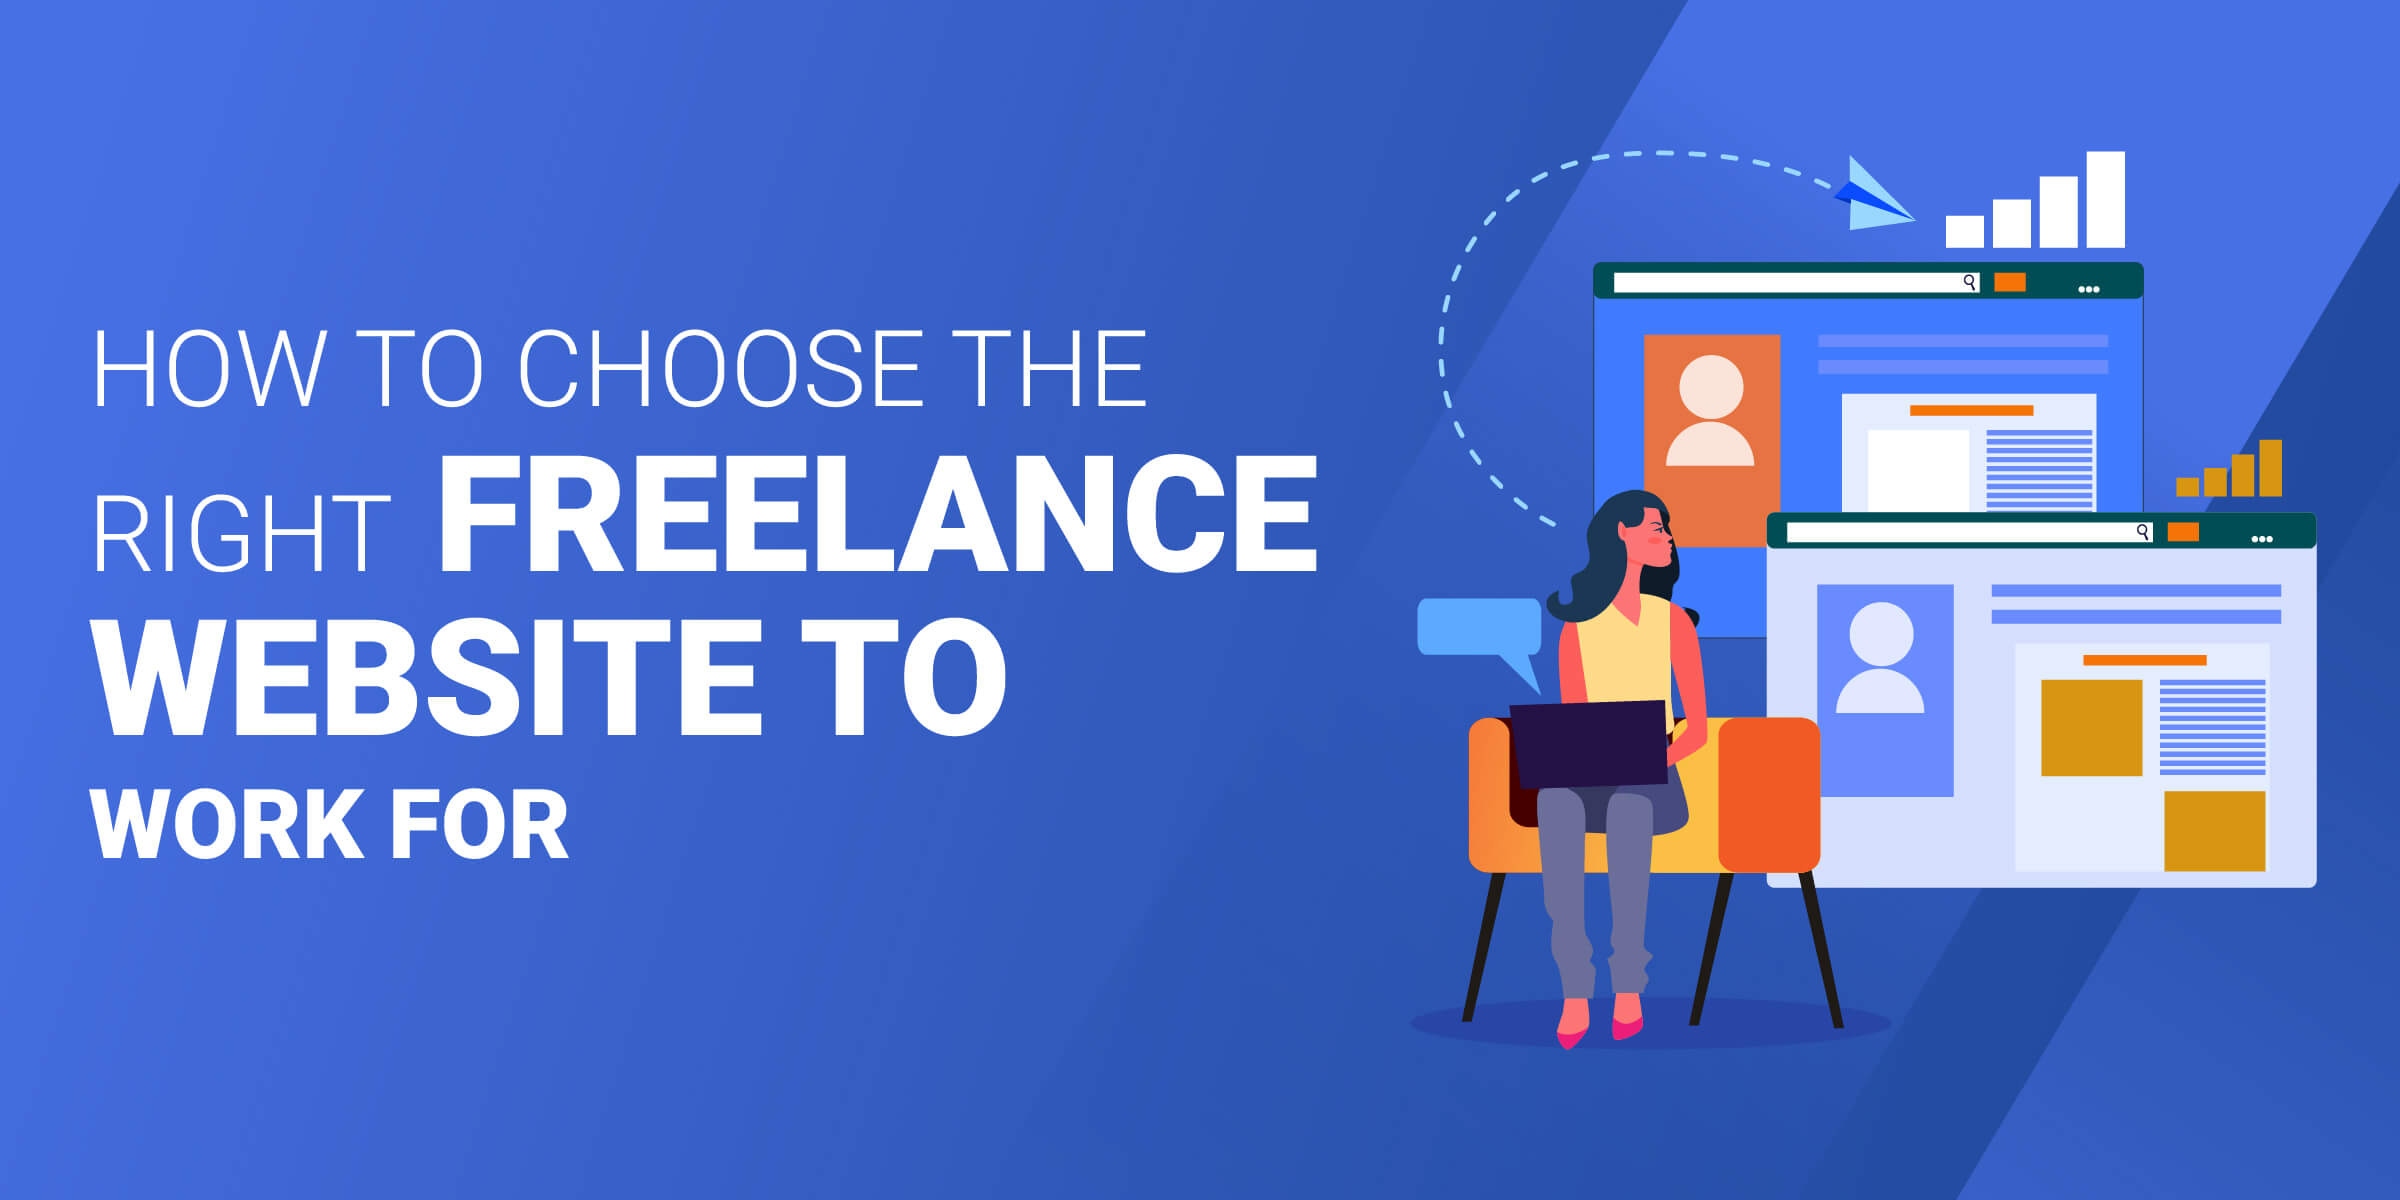 How to Choose Right Freelance Website to Work For